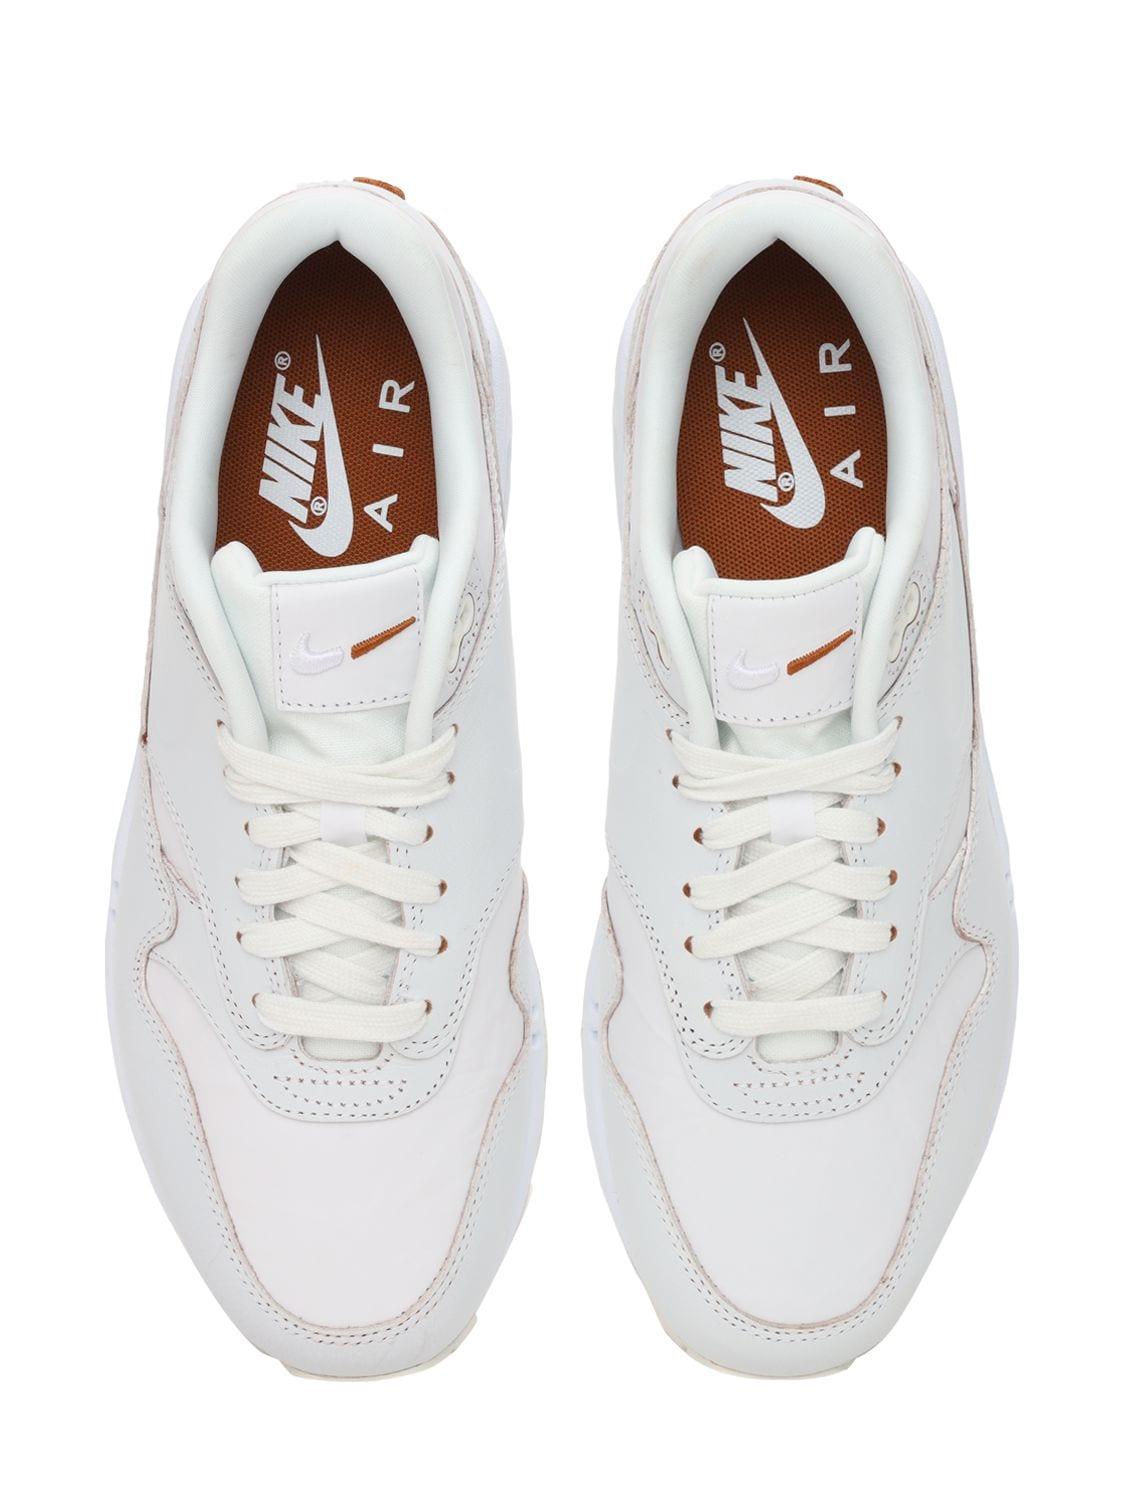 Nike Leather Air Max 1 Nature Wave Sneakers in White/Brown (White) - Lyst